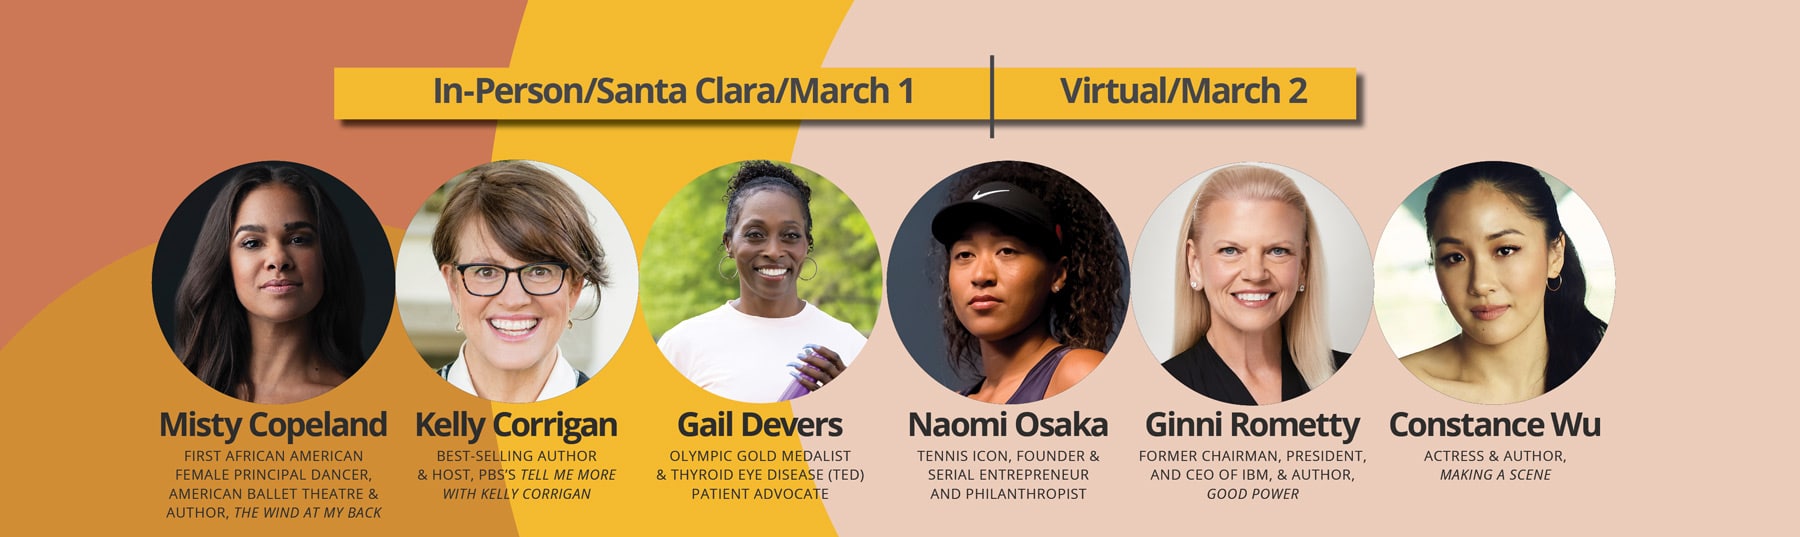 Join Misty Copeland, Kelly Corrigan, Gail Devers, Naomi Osaka, Ginni Rometty and Constance Wu at the 2023 Conference for Women!